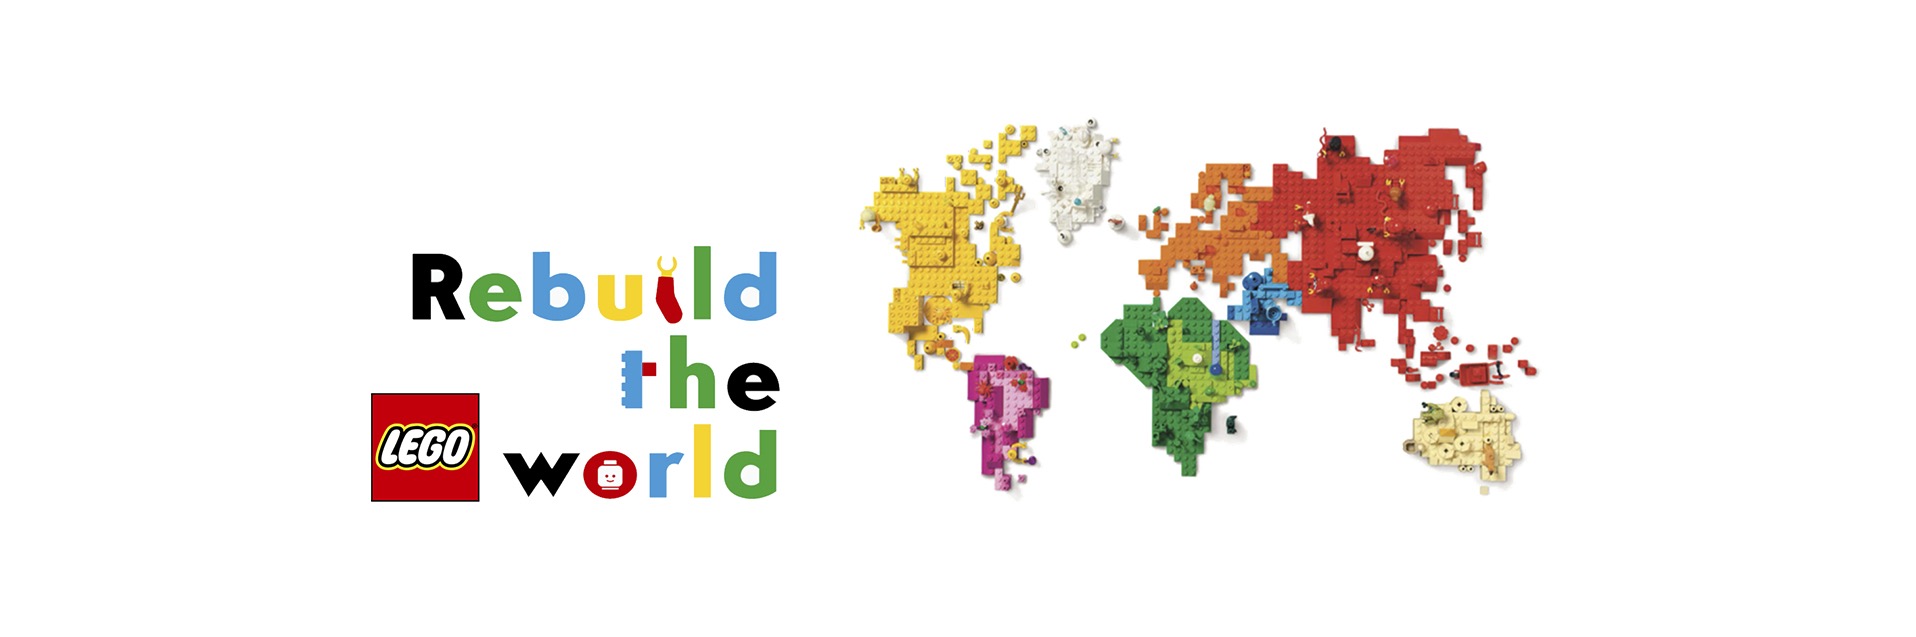 Rebuild The World With Lego